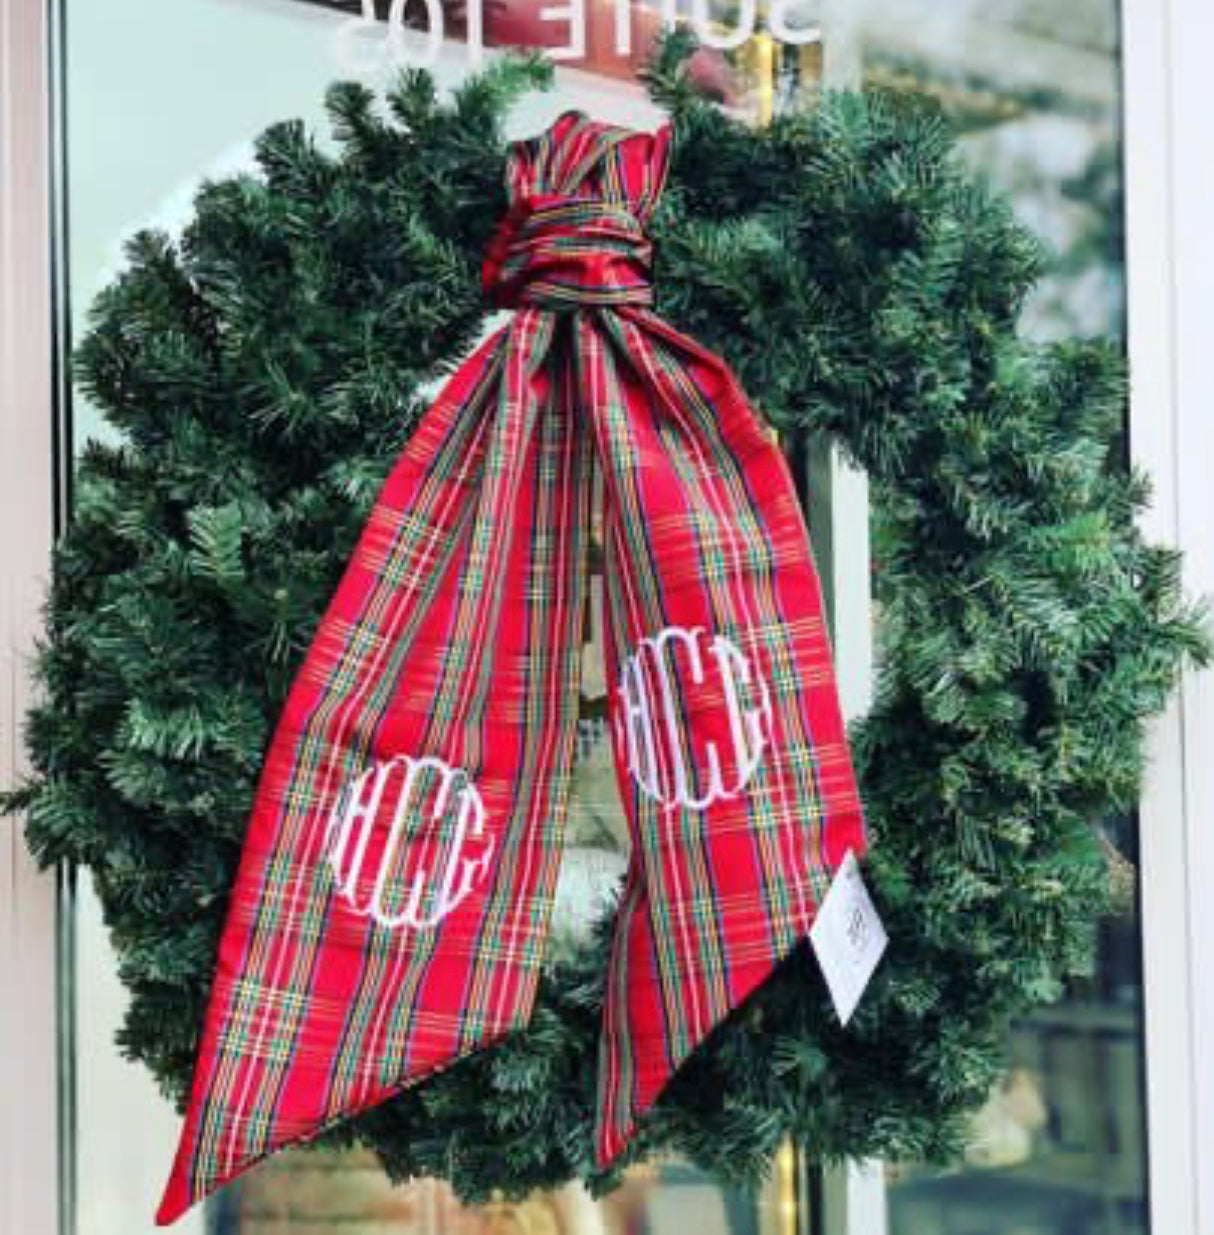 Orleans Monogrammed Wreath Sash – Frill Seekers Gifts